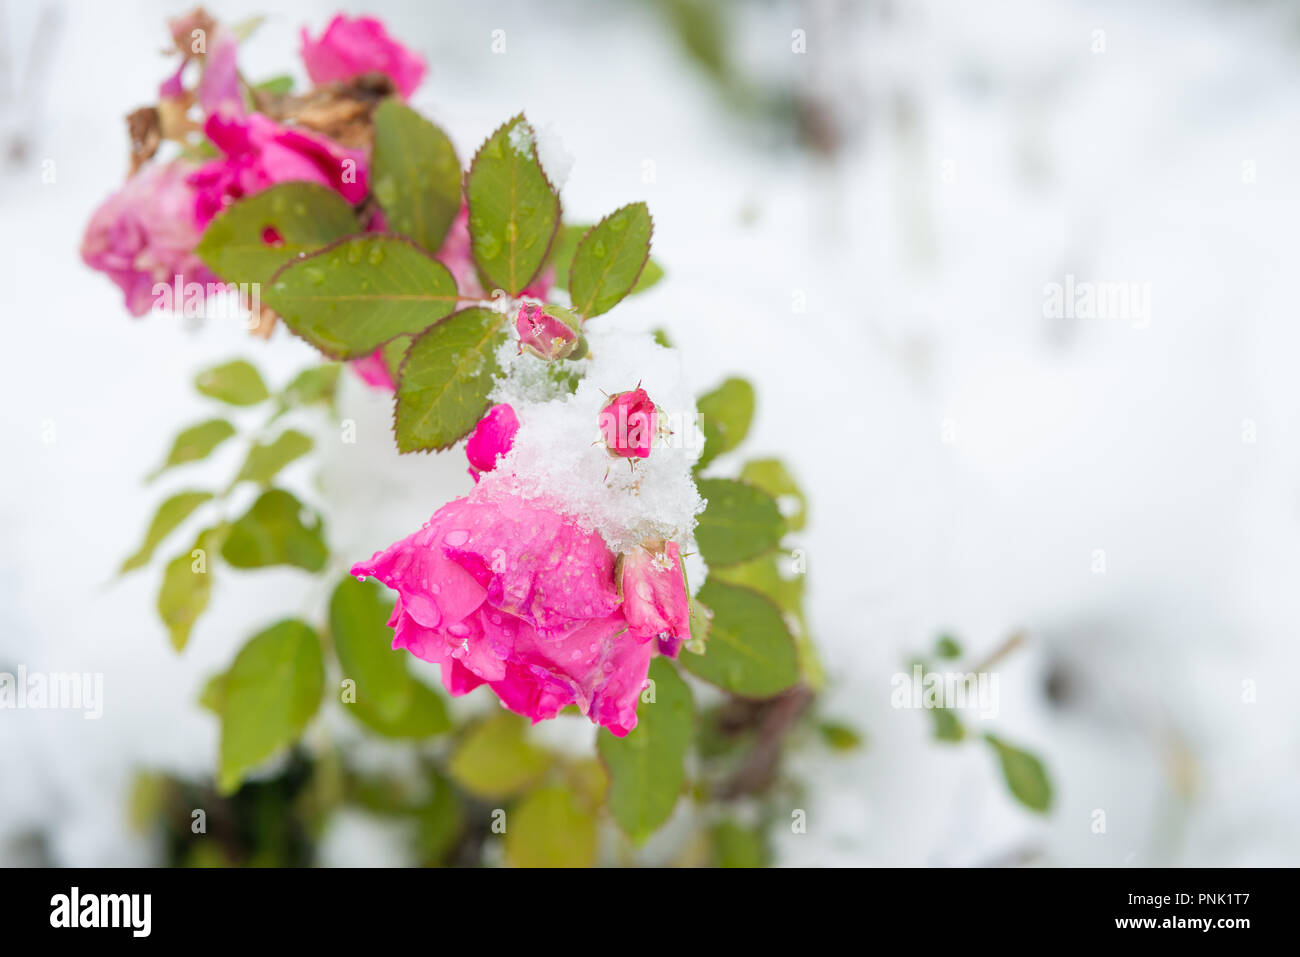 Roses From The Hardy Shrub Rose Variety Frontenac Covered By Snow During An Unseasonable Snowstorm In Central Alberta Canada Stock Photo Alamy